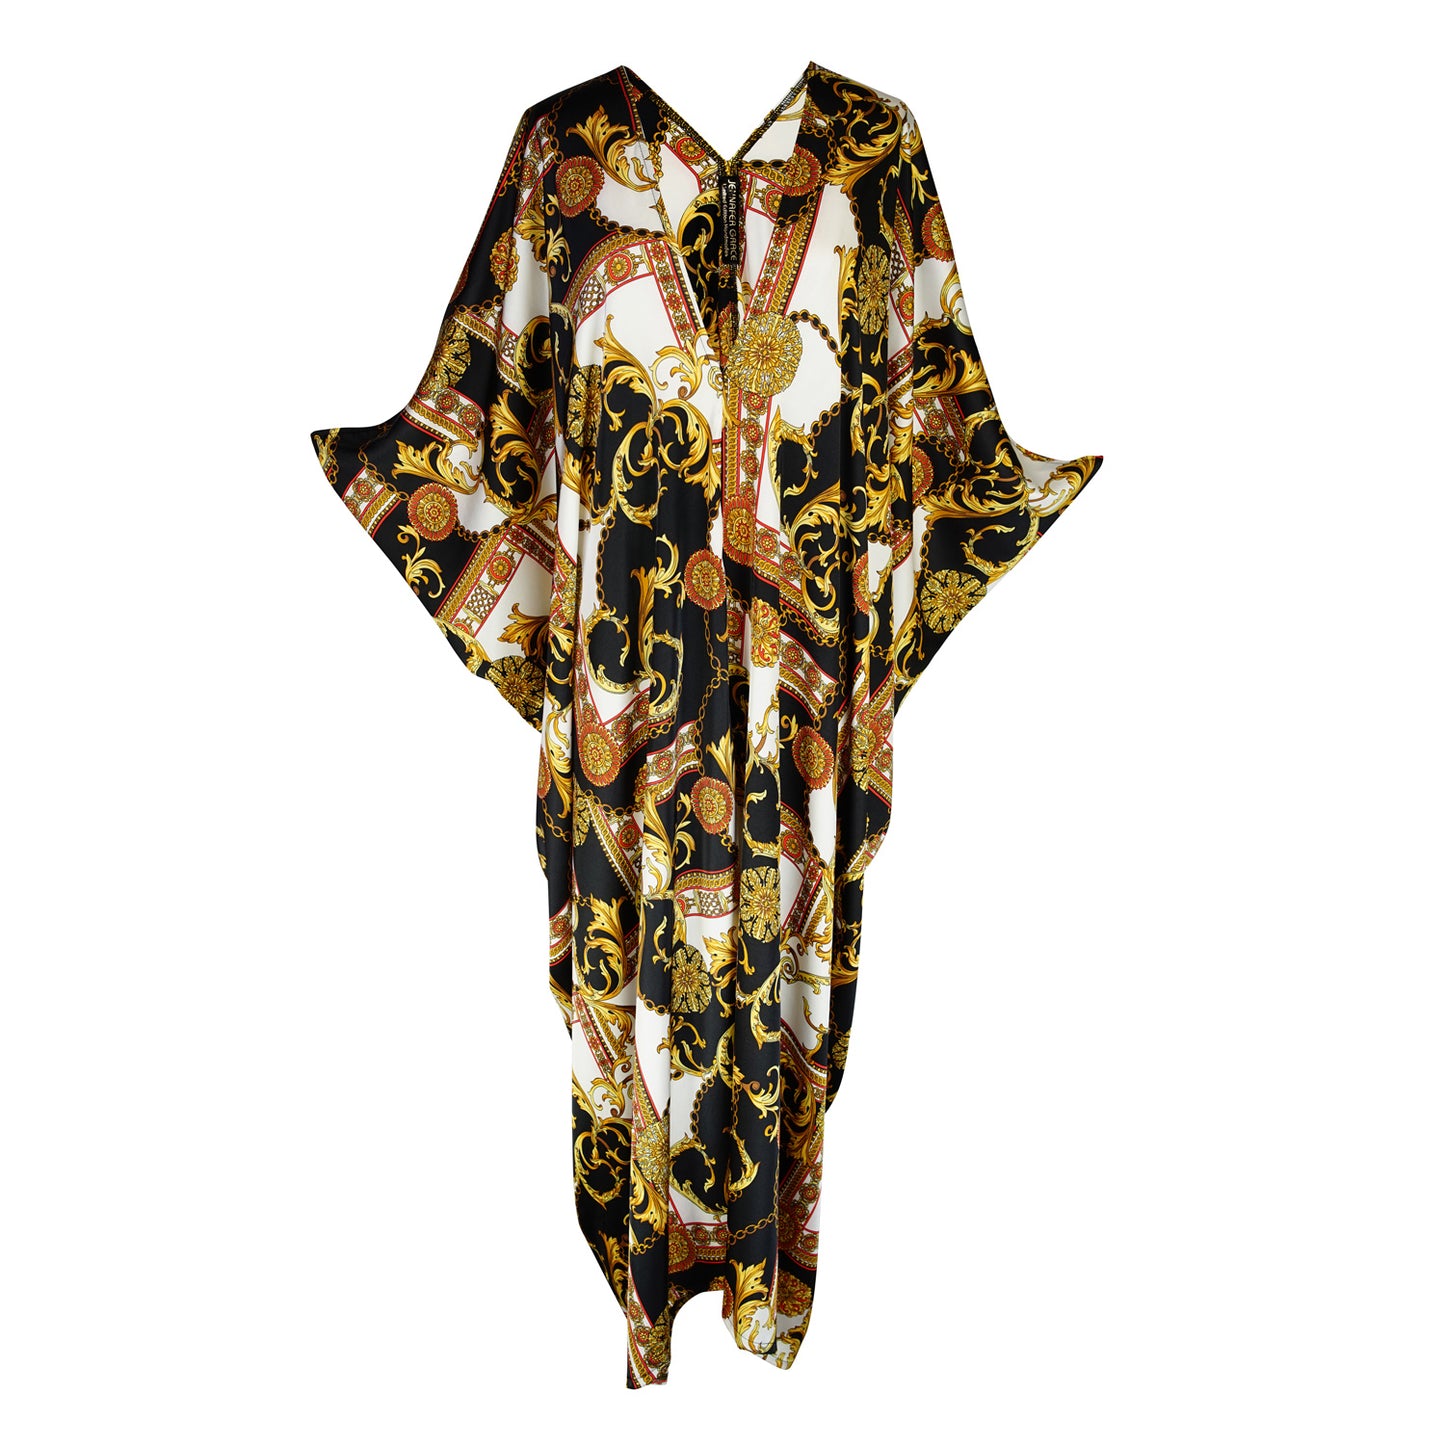 Jennafer Grace Voglia Amarena Caftan. Featuring a rococo baroque print with blocks of black and white with golden and red accents. Featuring a deep v-neck, batwing sleeves, and an ankle length hem. 